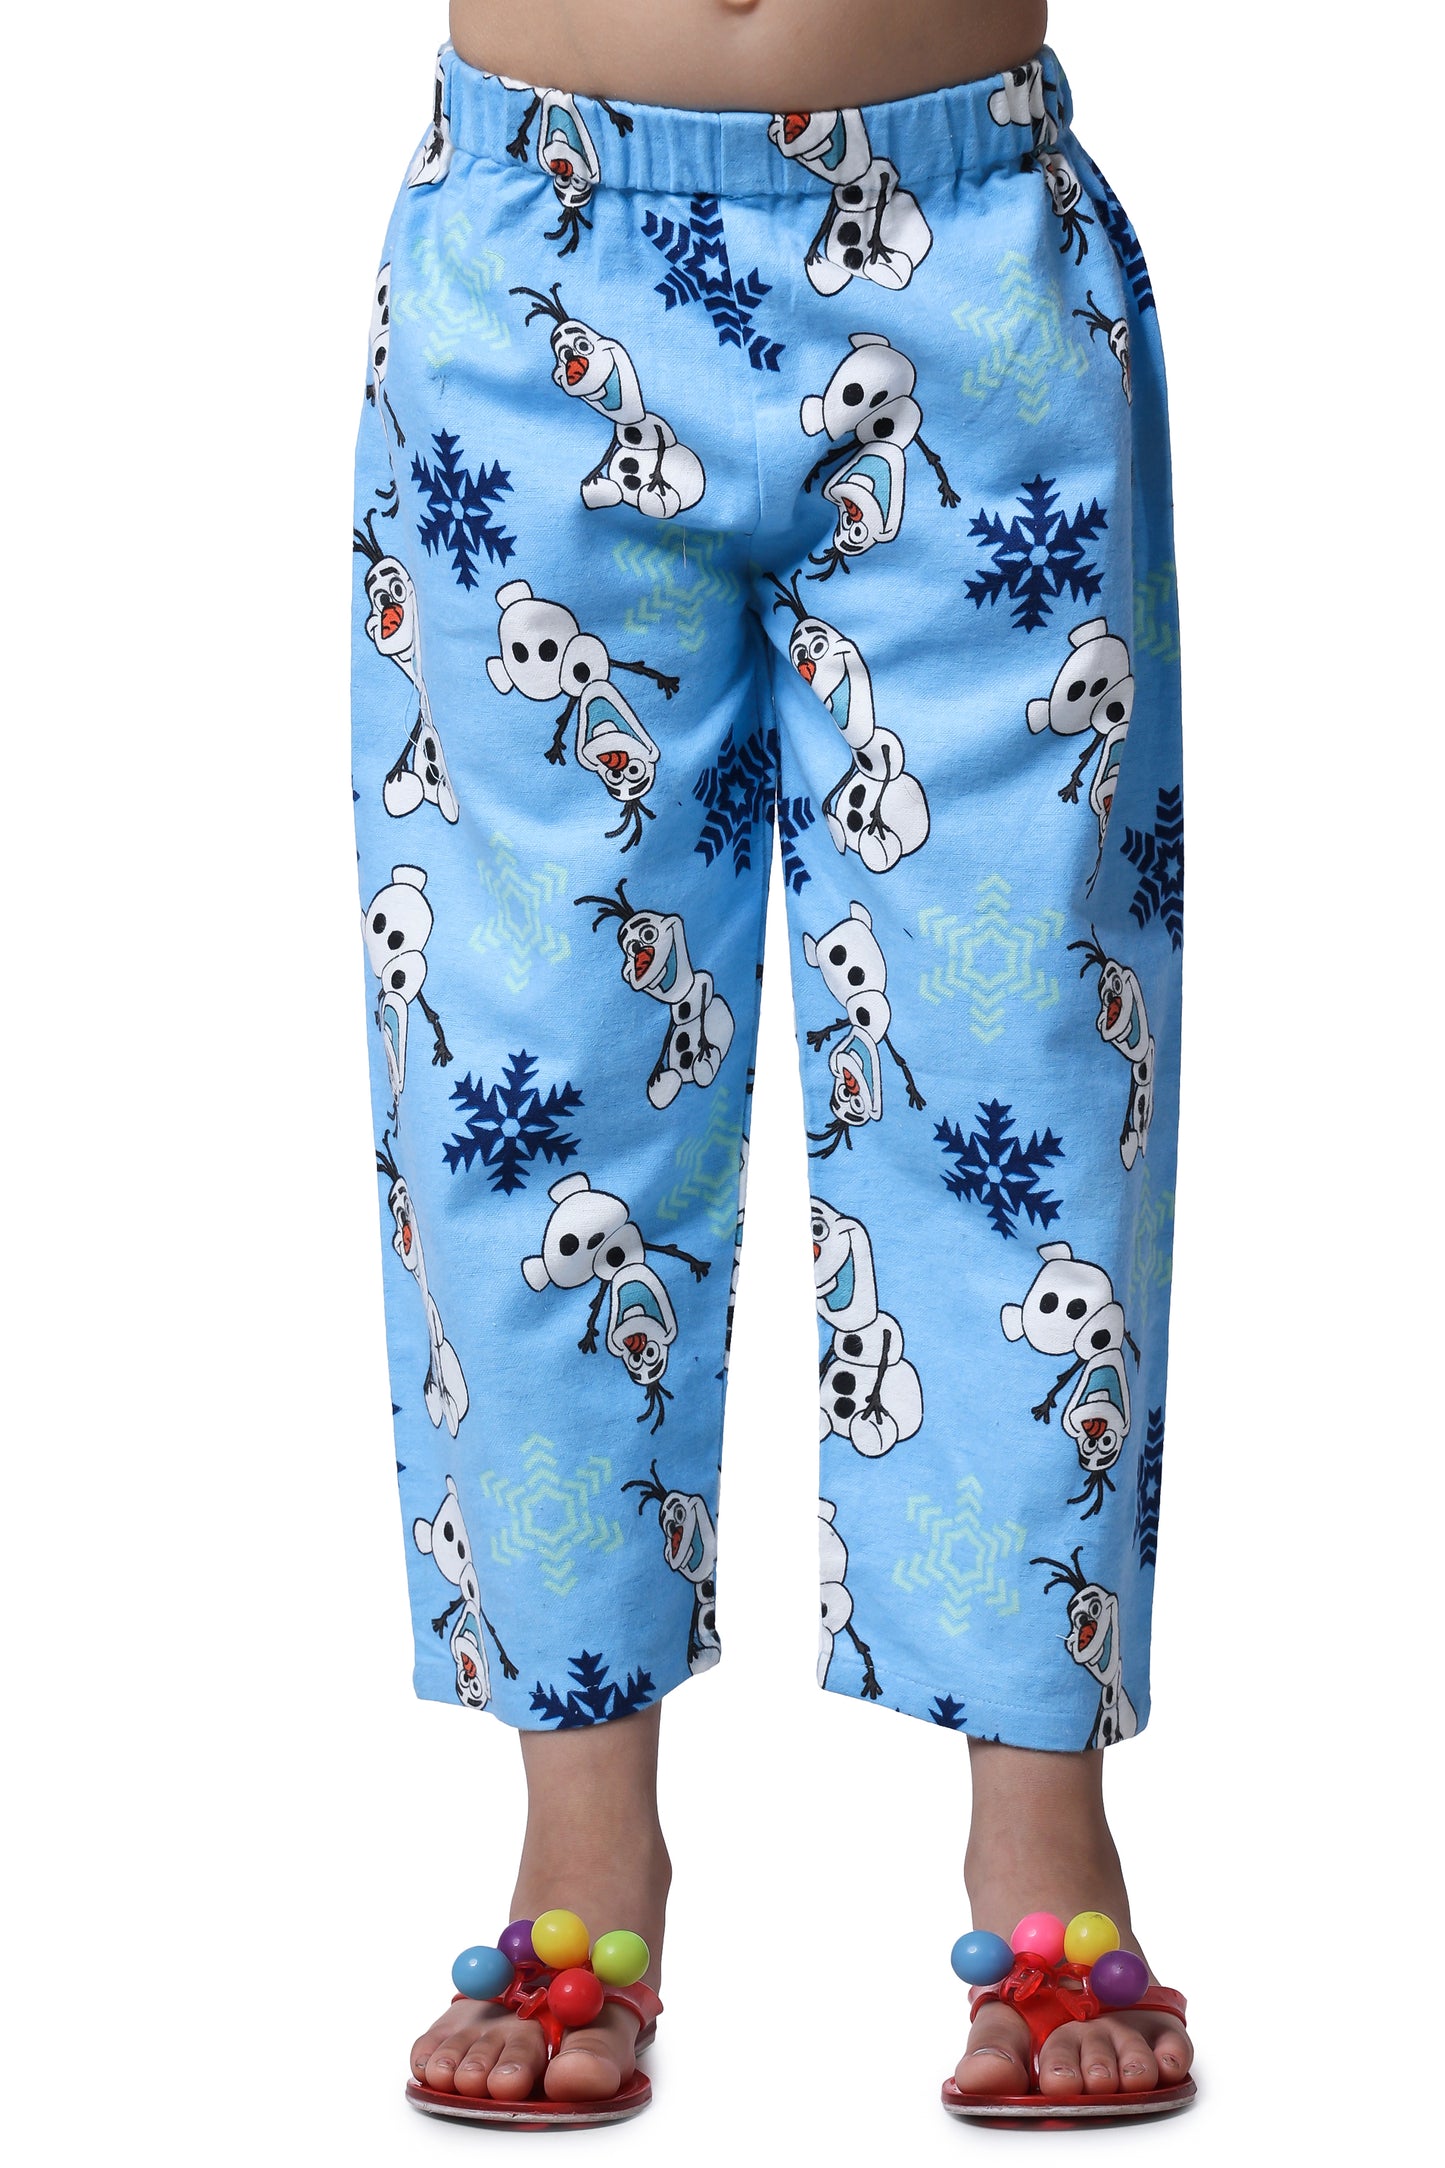 Piccolo Night suit - Blue Olaf Print